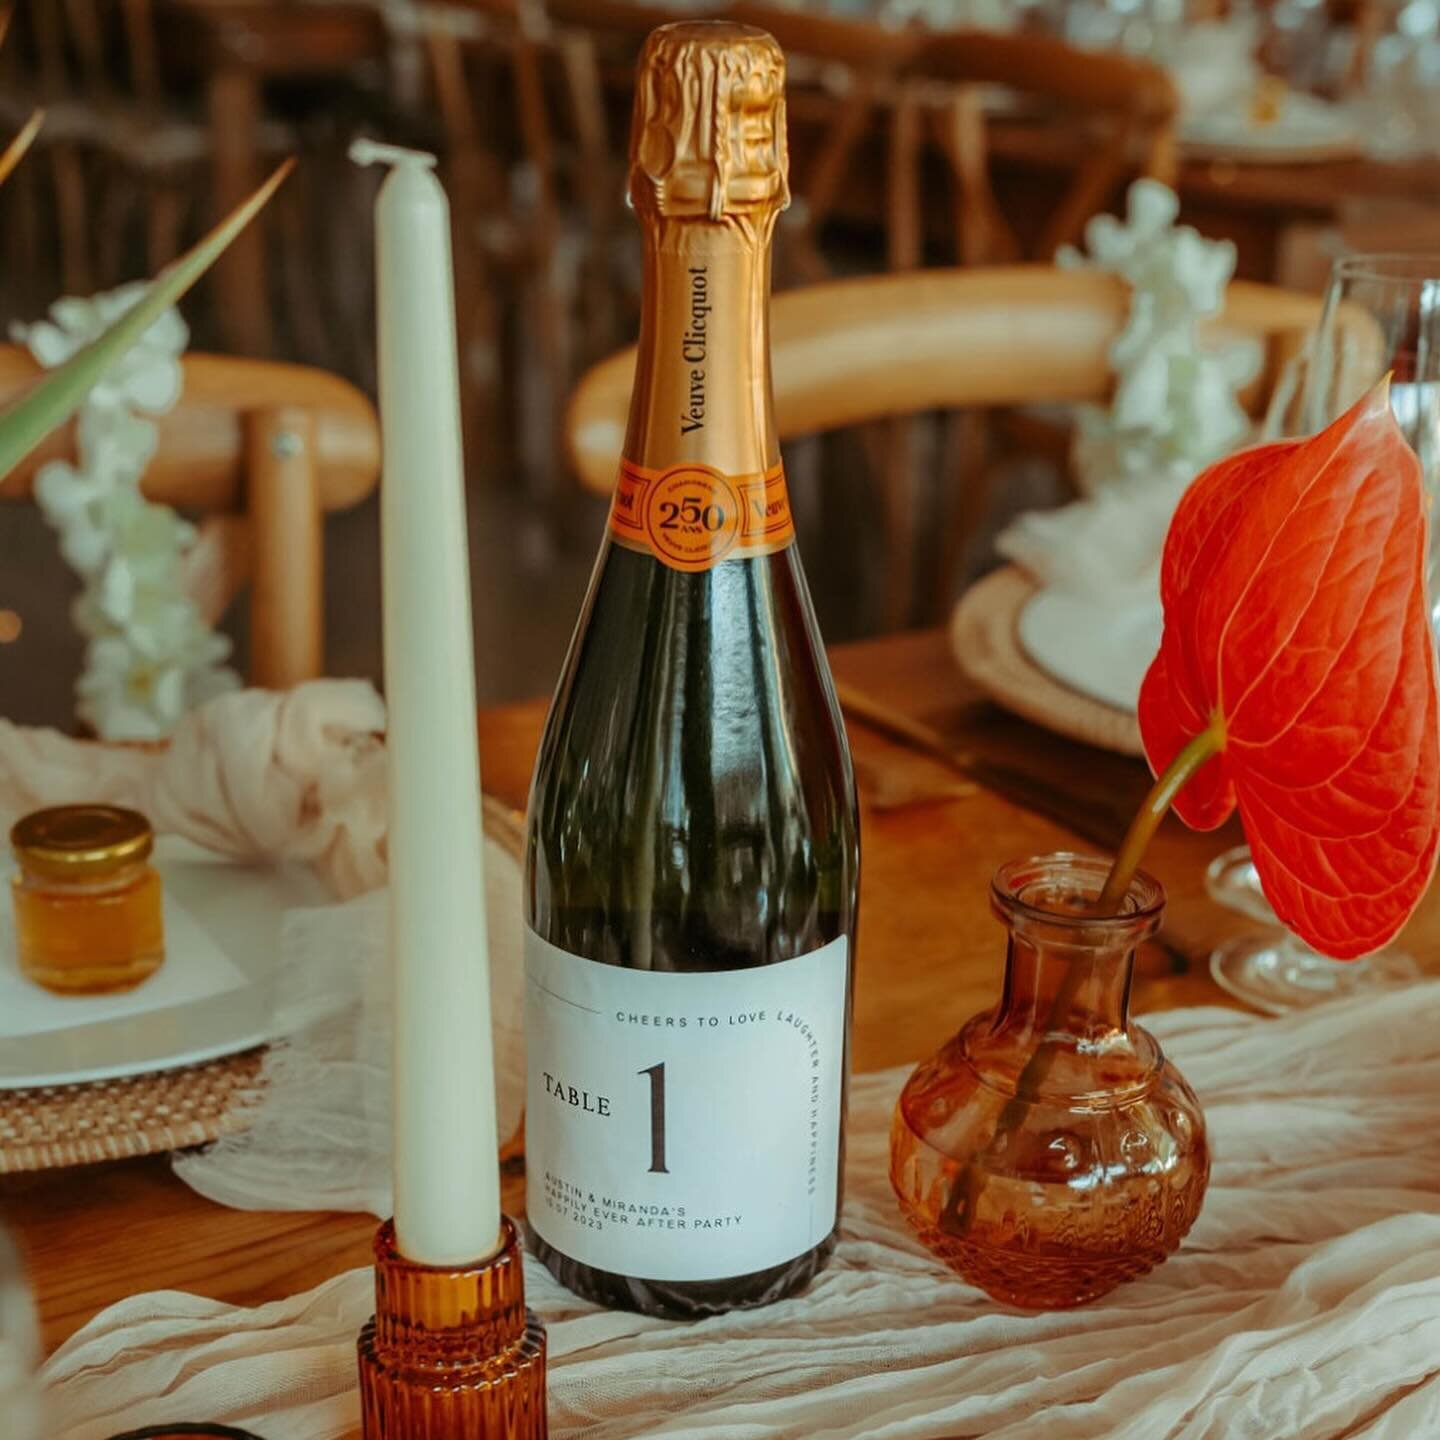 Adding that ✨hint✨ of personalization to your wedding😍 How cute are these champagne table numbers? 🍾
&bull;florals @ahuntdesign 
&bull;photos @kaelynnlongfellow.photographer 
&bull;rentals @herriottsrte 
&bull;dj+photobooth @completeweddingsctil 
&